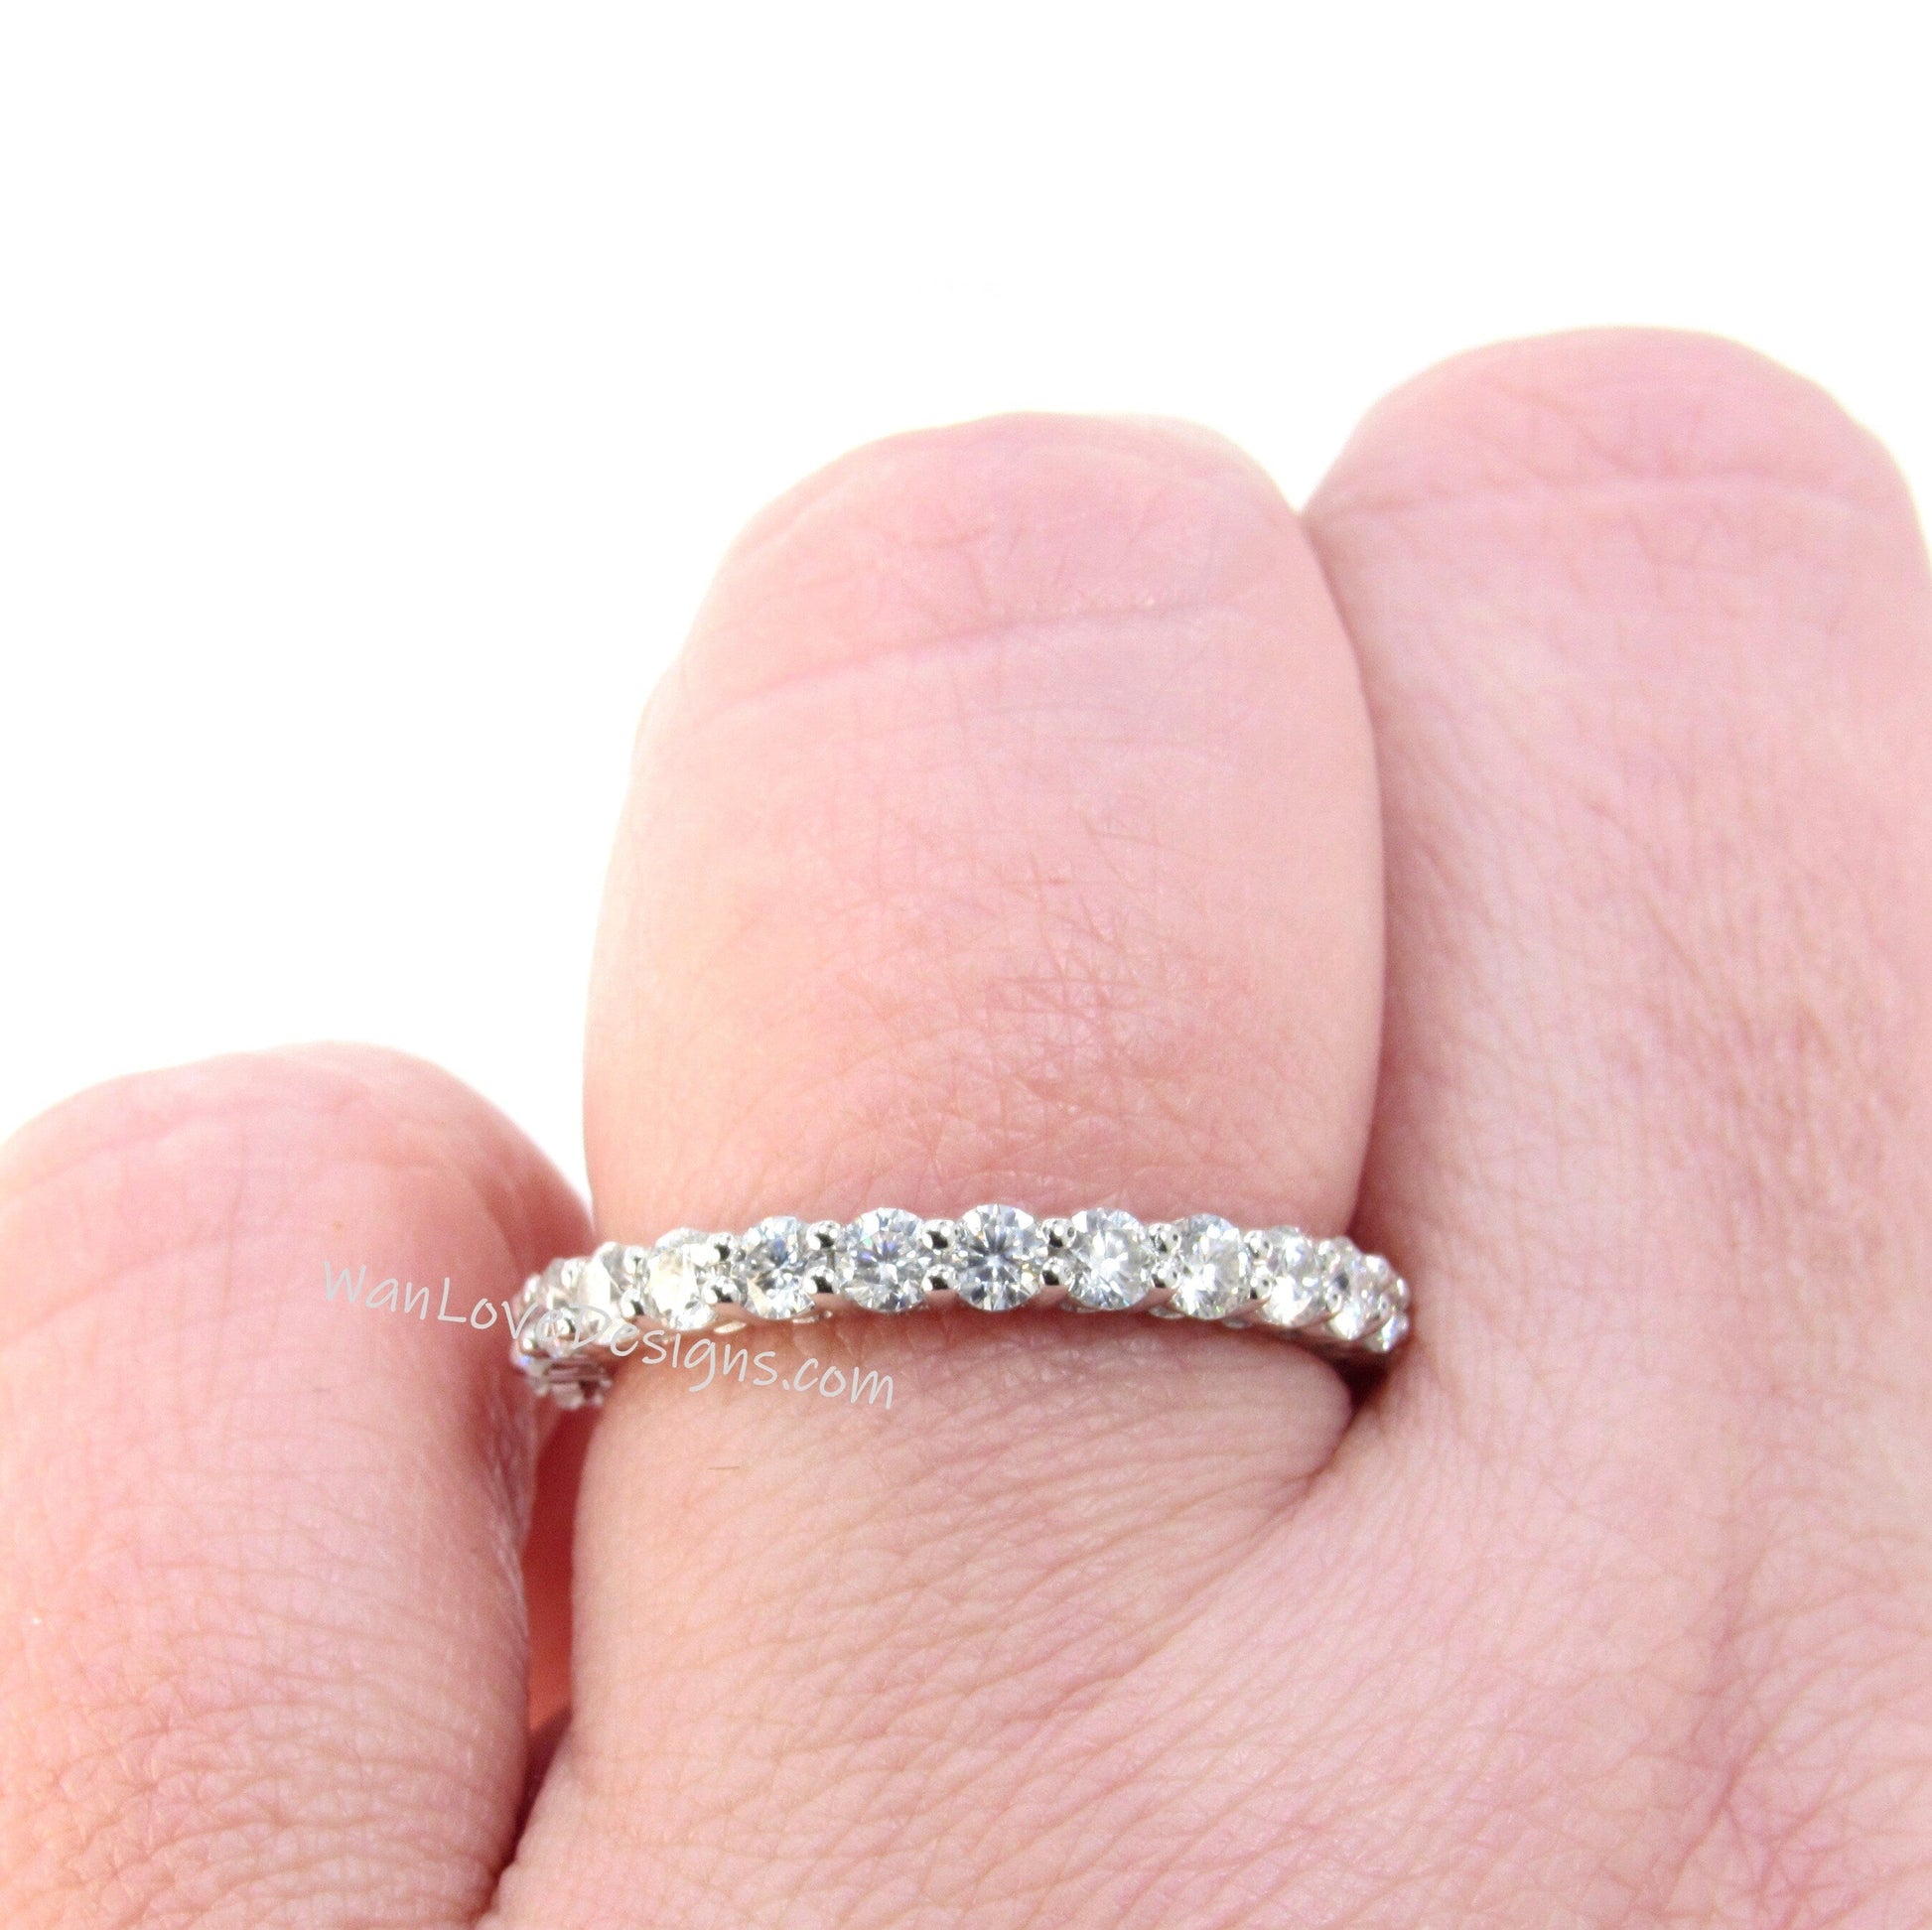 2.50 MM Round Moissanite Wedding Band / Solid Gold Bridal Almost Eternity Band / Matching Band For Engagement Ring / Anniversary Band Gift Wan Love Designs